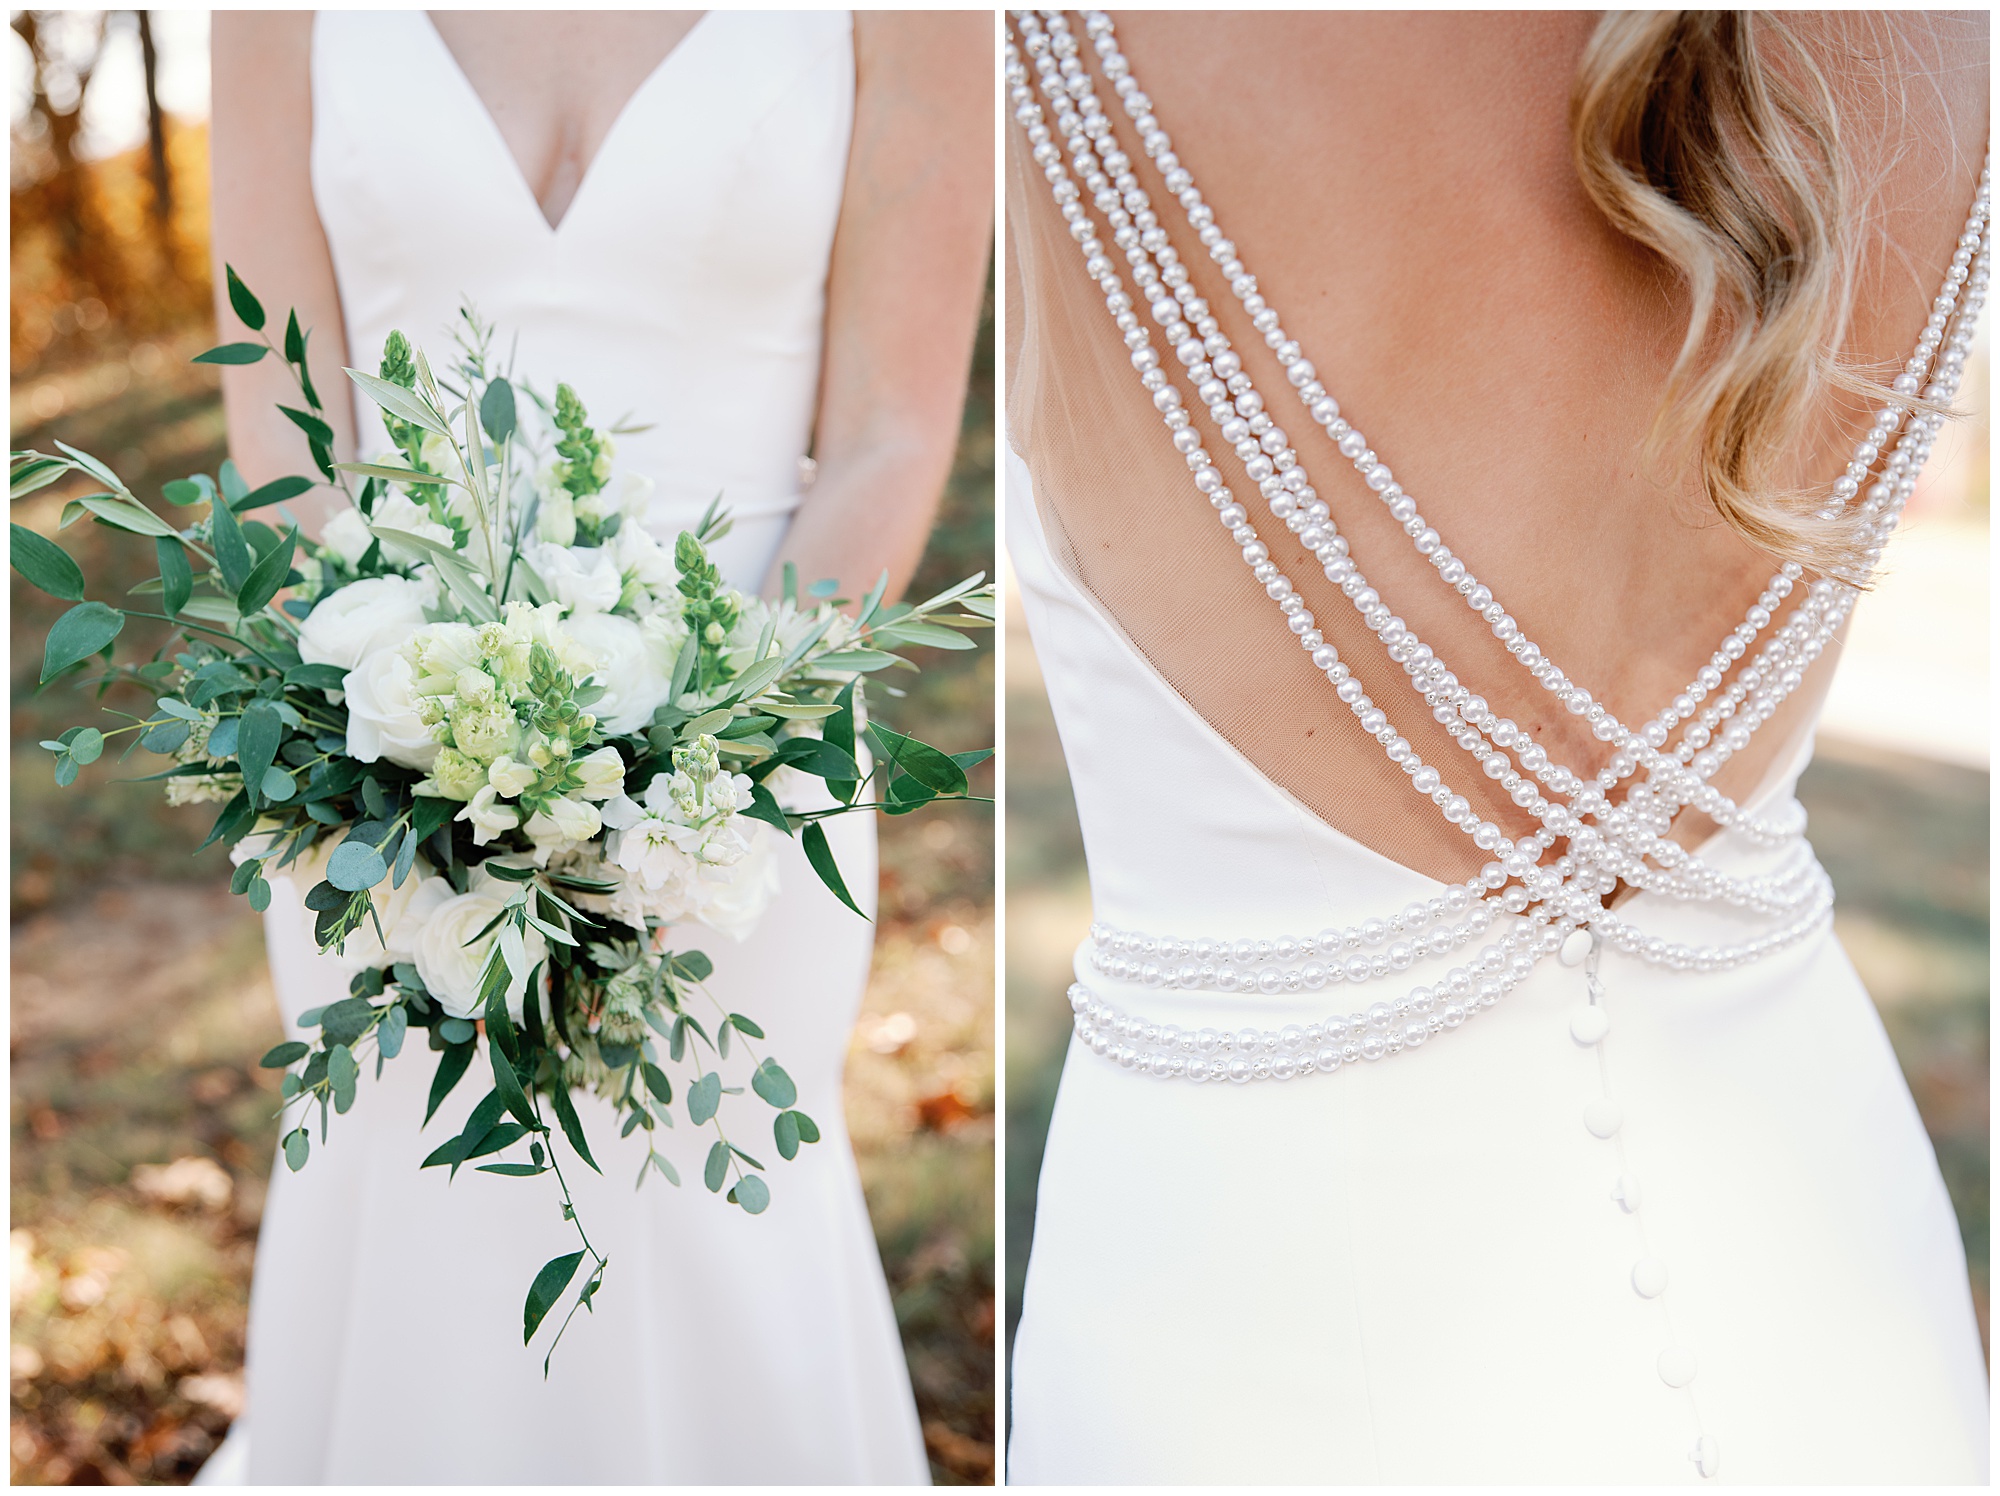 Dress details and bridal boquest - photography by kathy beaver